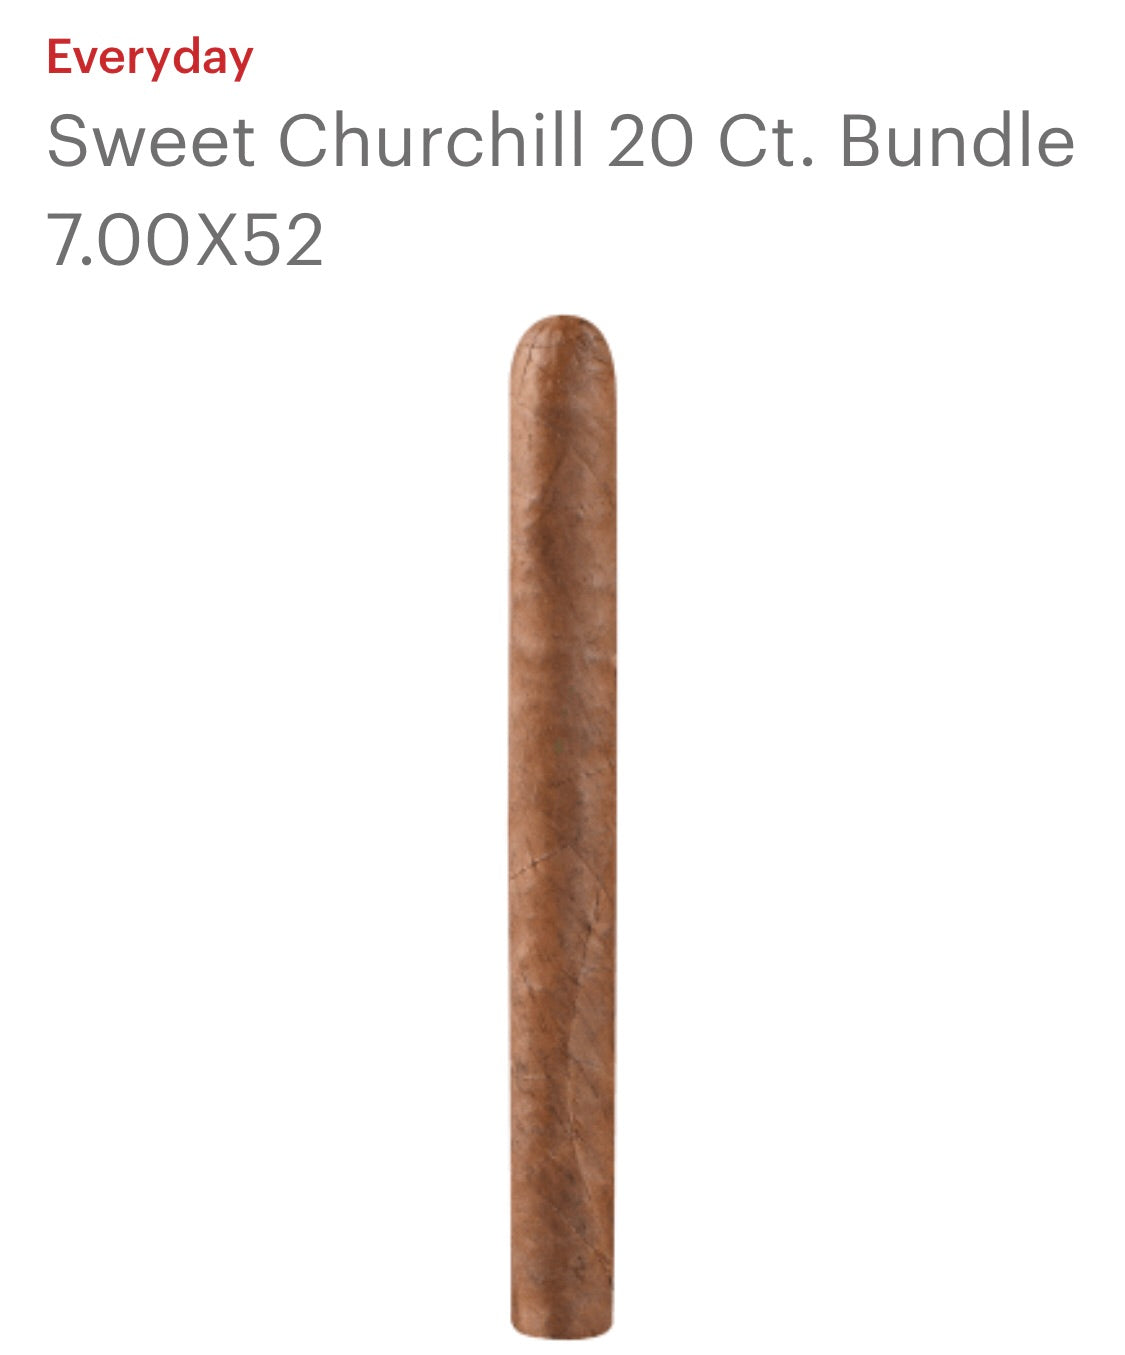 EVERYDALY SWEET CHURCHILL